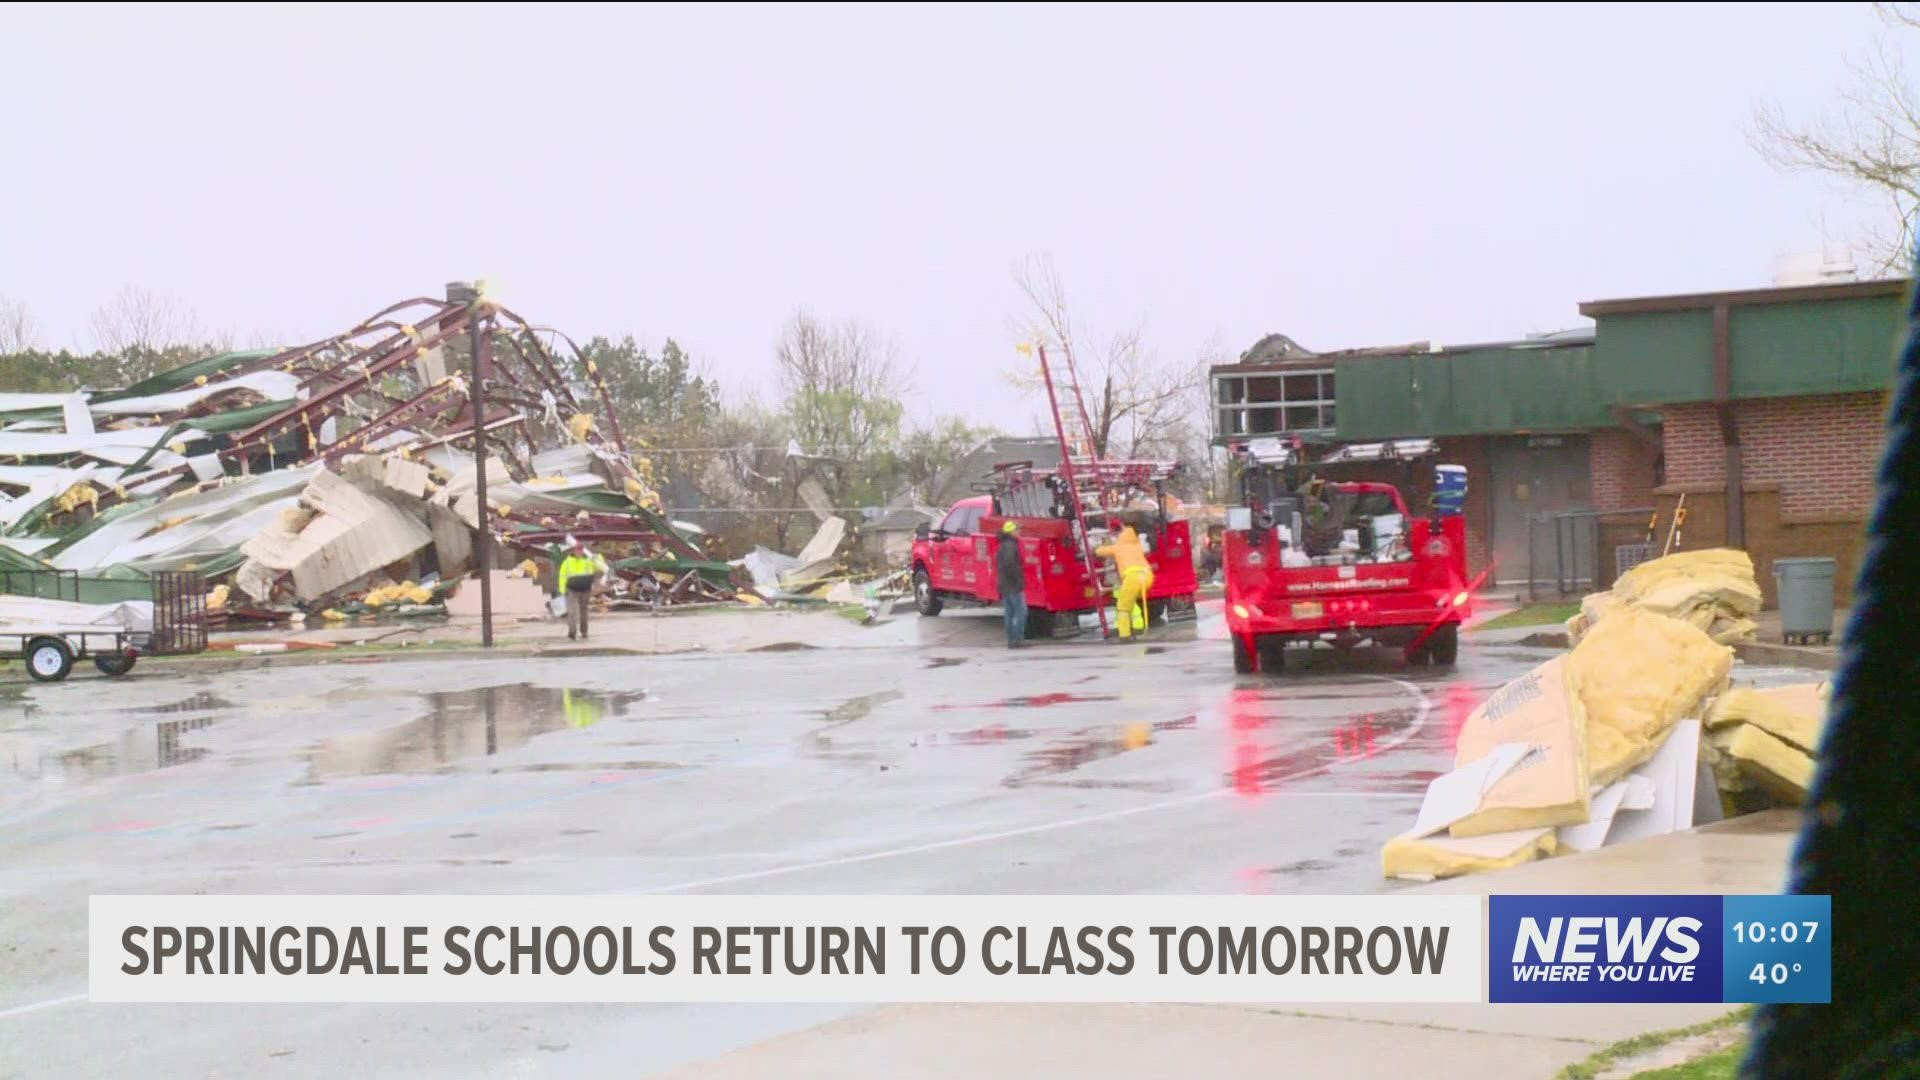 Springdale Schools were closed Wednesday, March 30, due to storm damage but will reopen Thursday following inspections done by structural engineers.